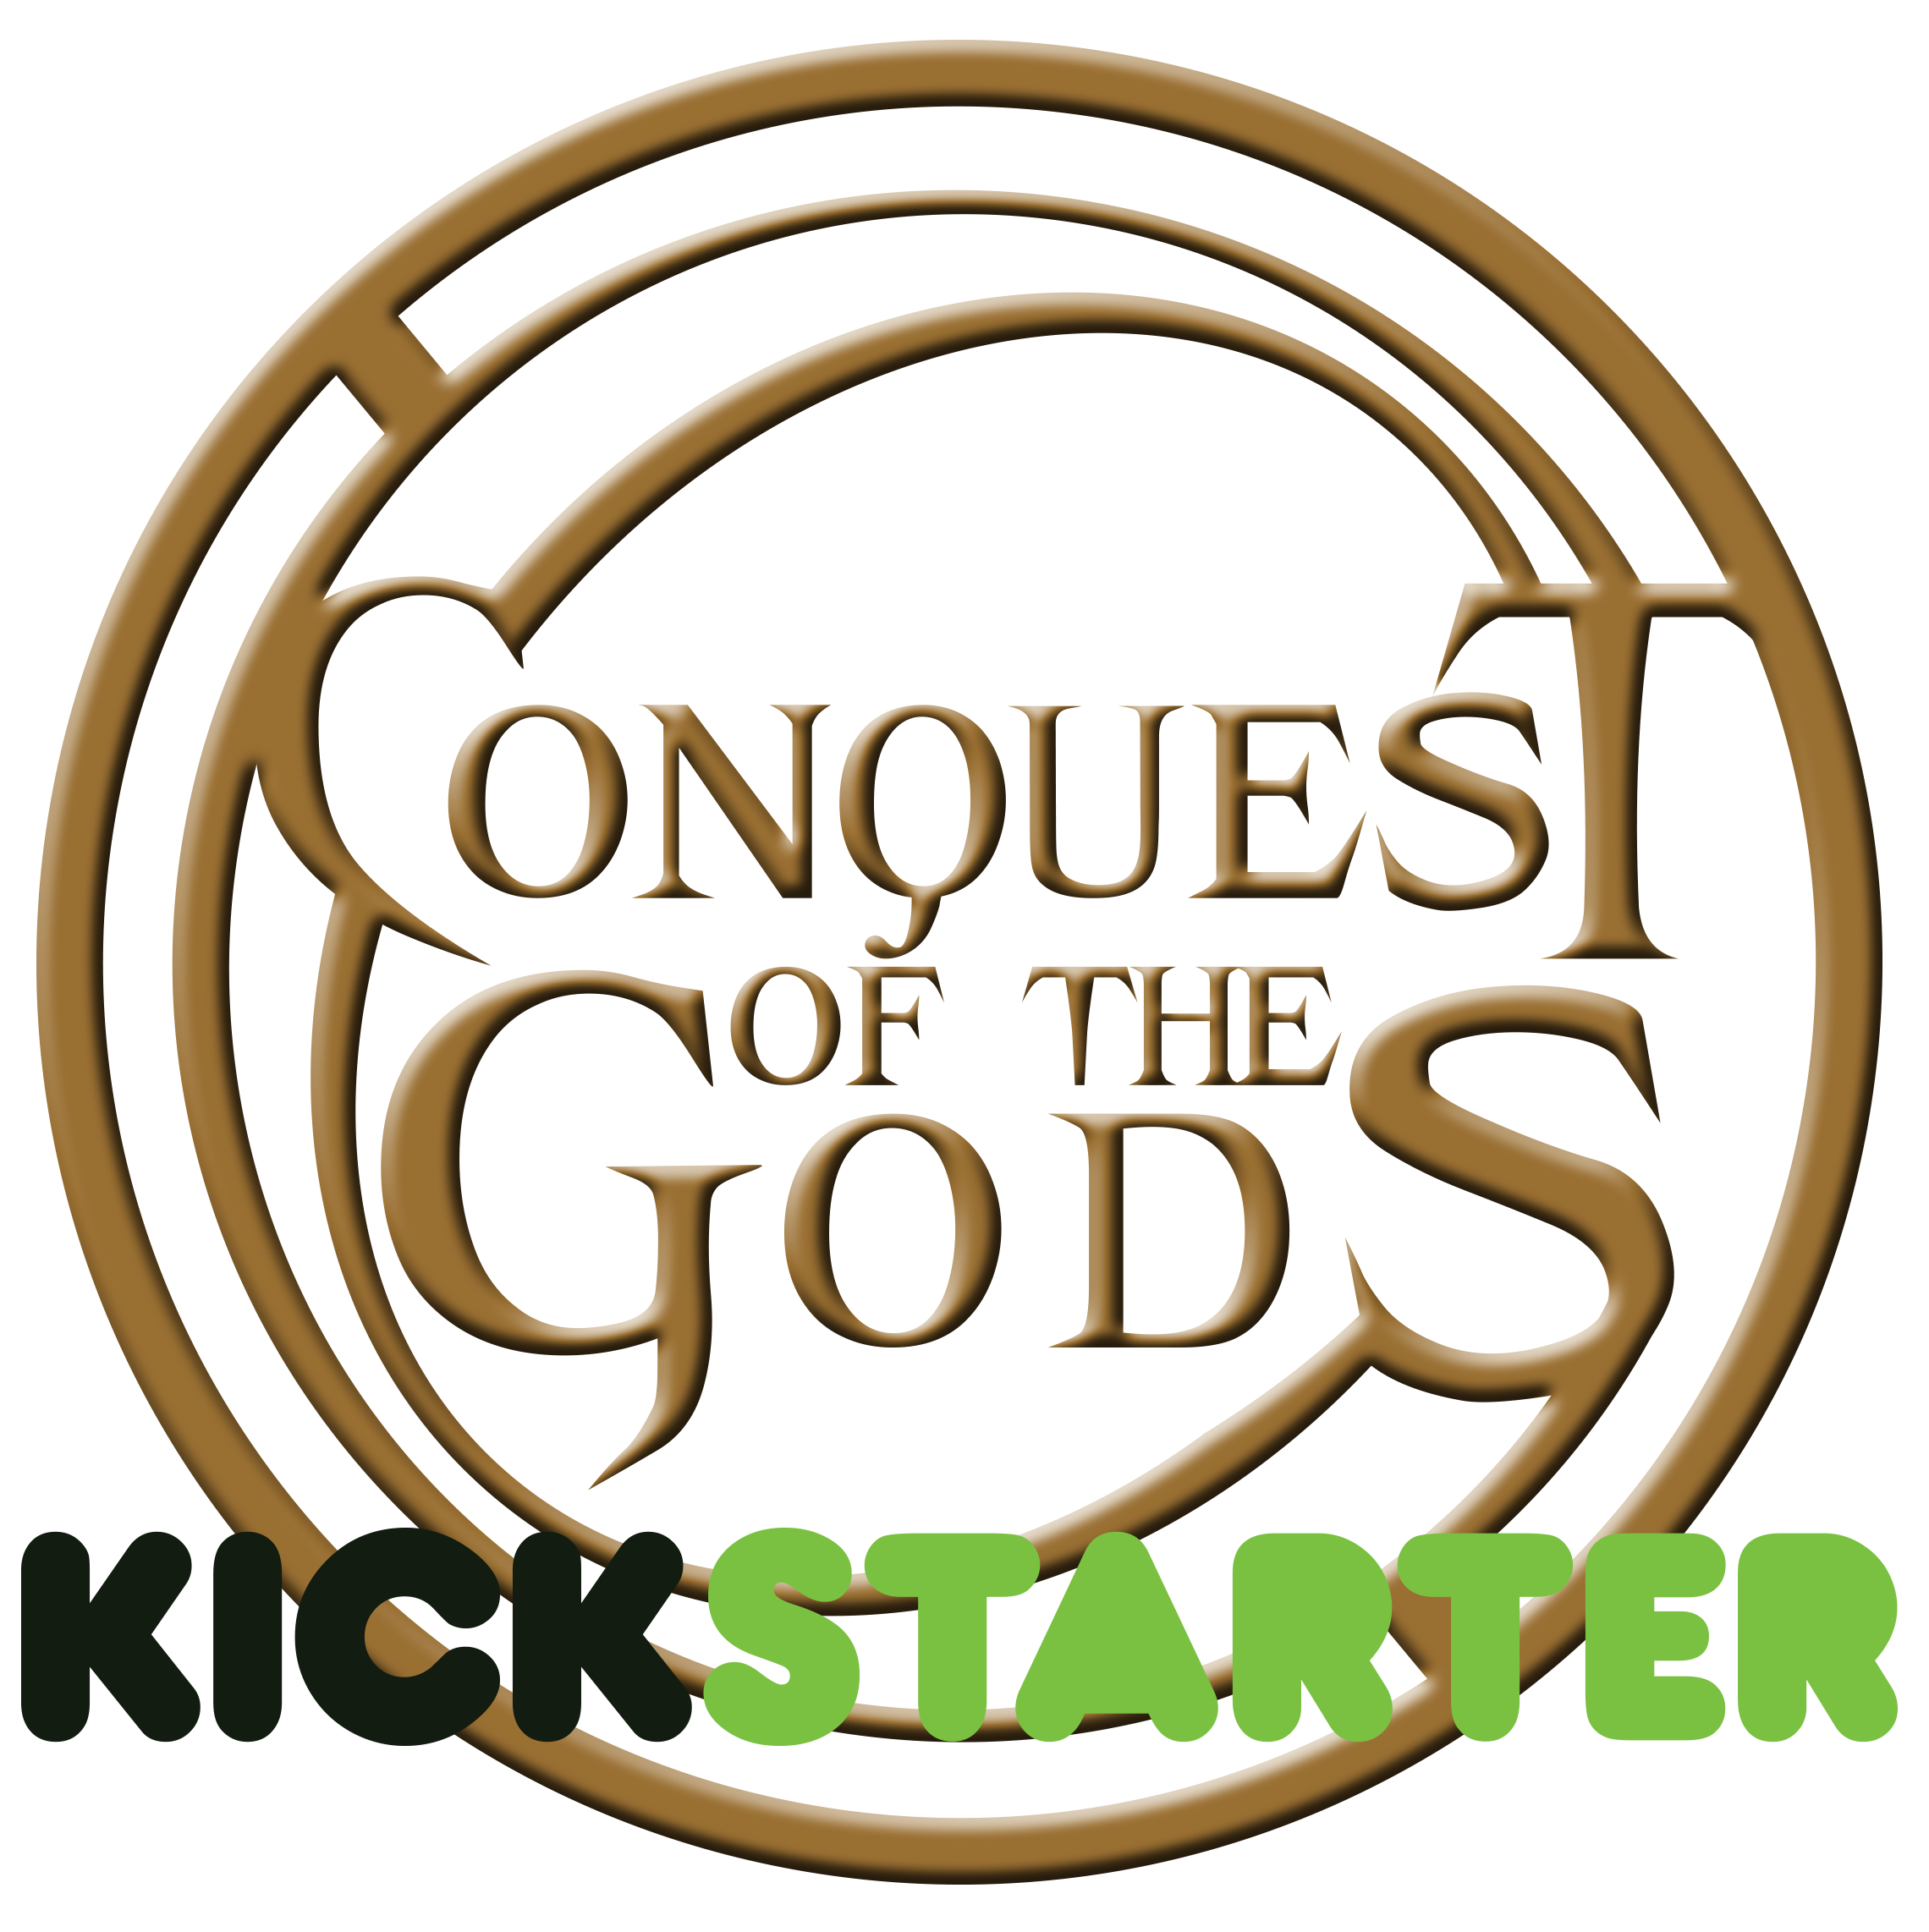 Conquest of the Gods Kickstarter is live!